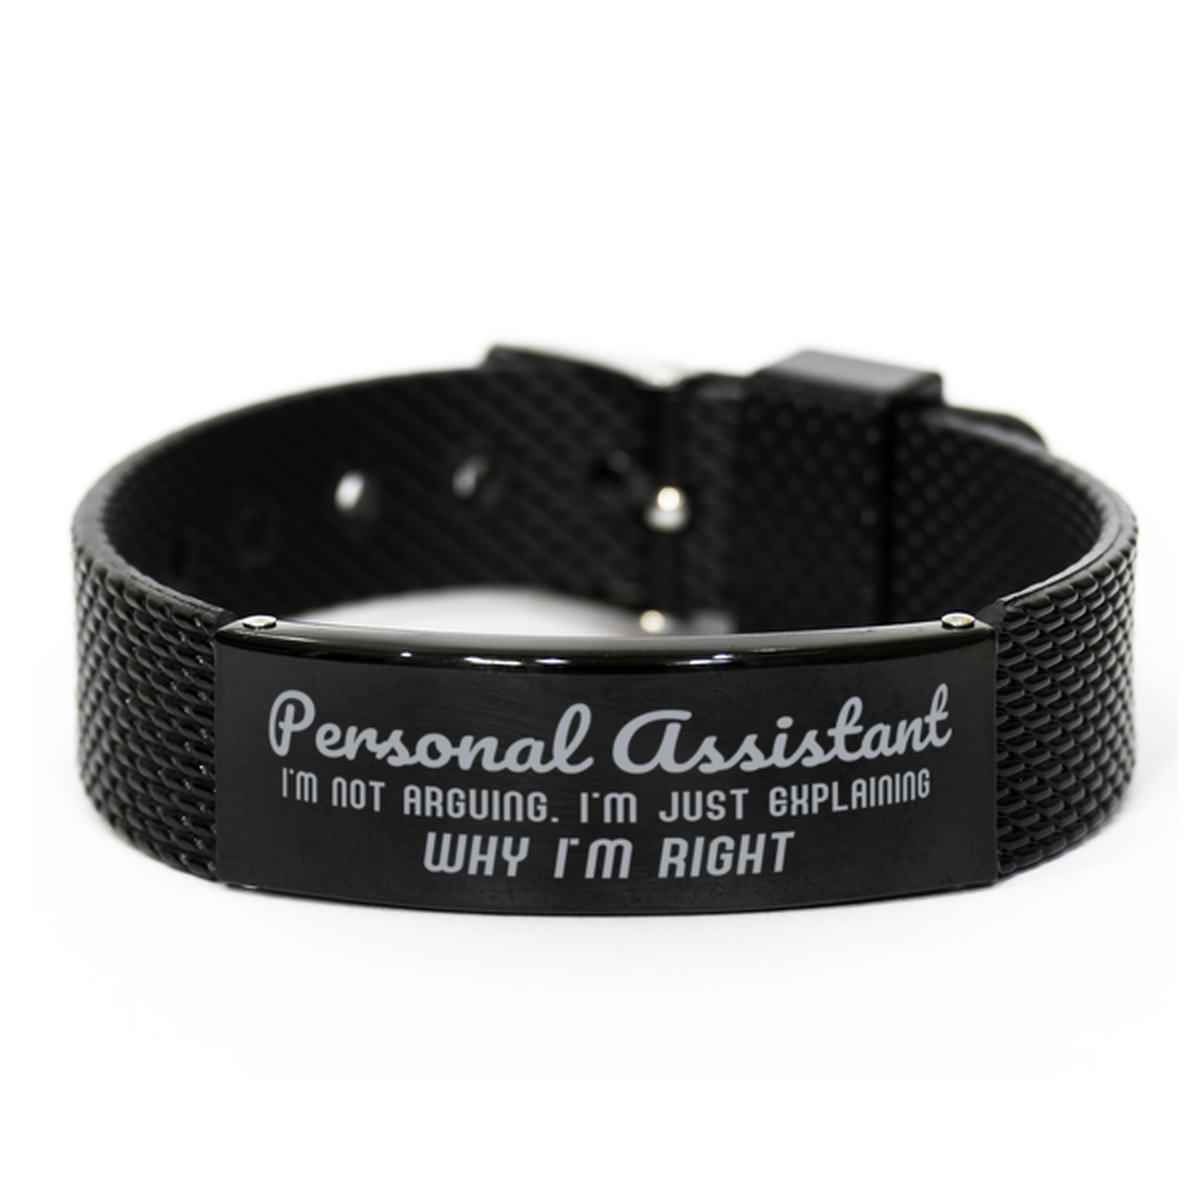 Personal Assistant I'm not Arguing. I'm Just Explaining Why I'm RIGHT Black Shark Mesh Bracelet, Funny Saying Quote Personal Assistant Gifts For Personal Assistant Graduation Birthday Christmas Gifts for Men Women Coworker